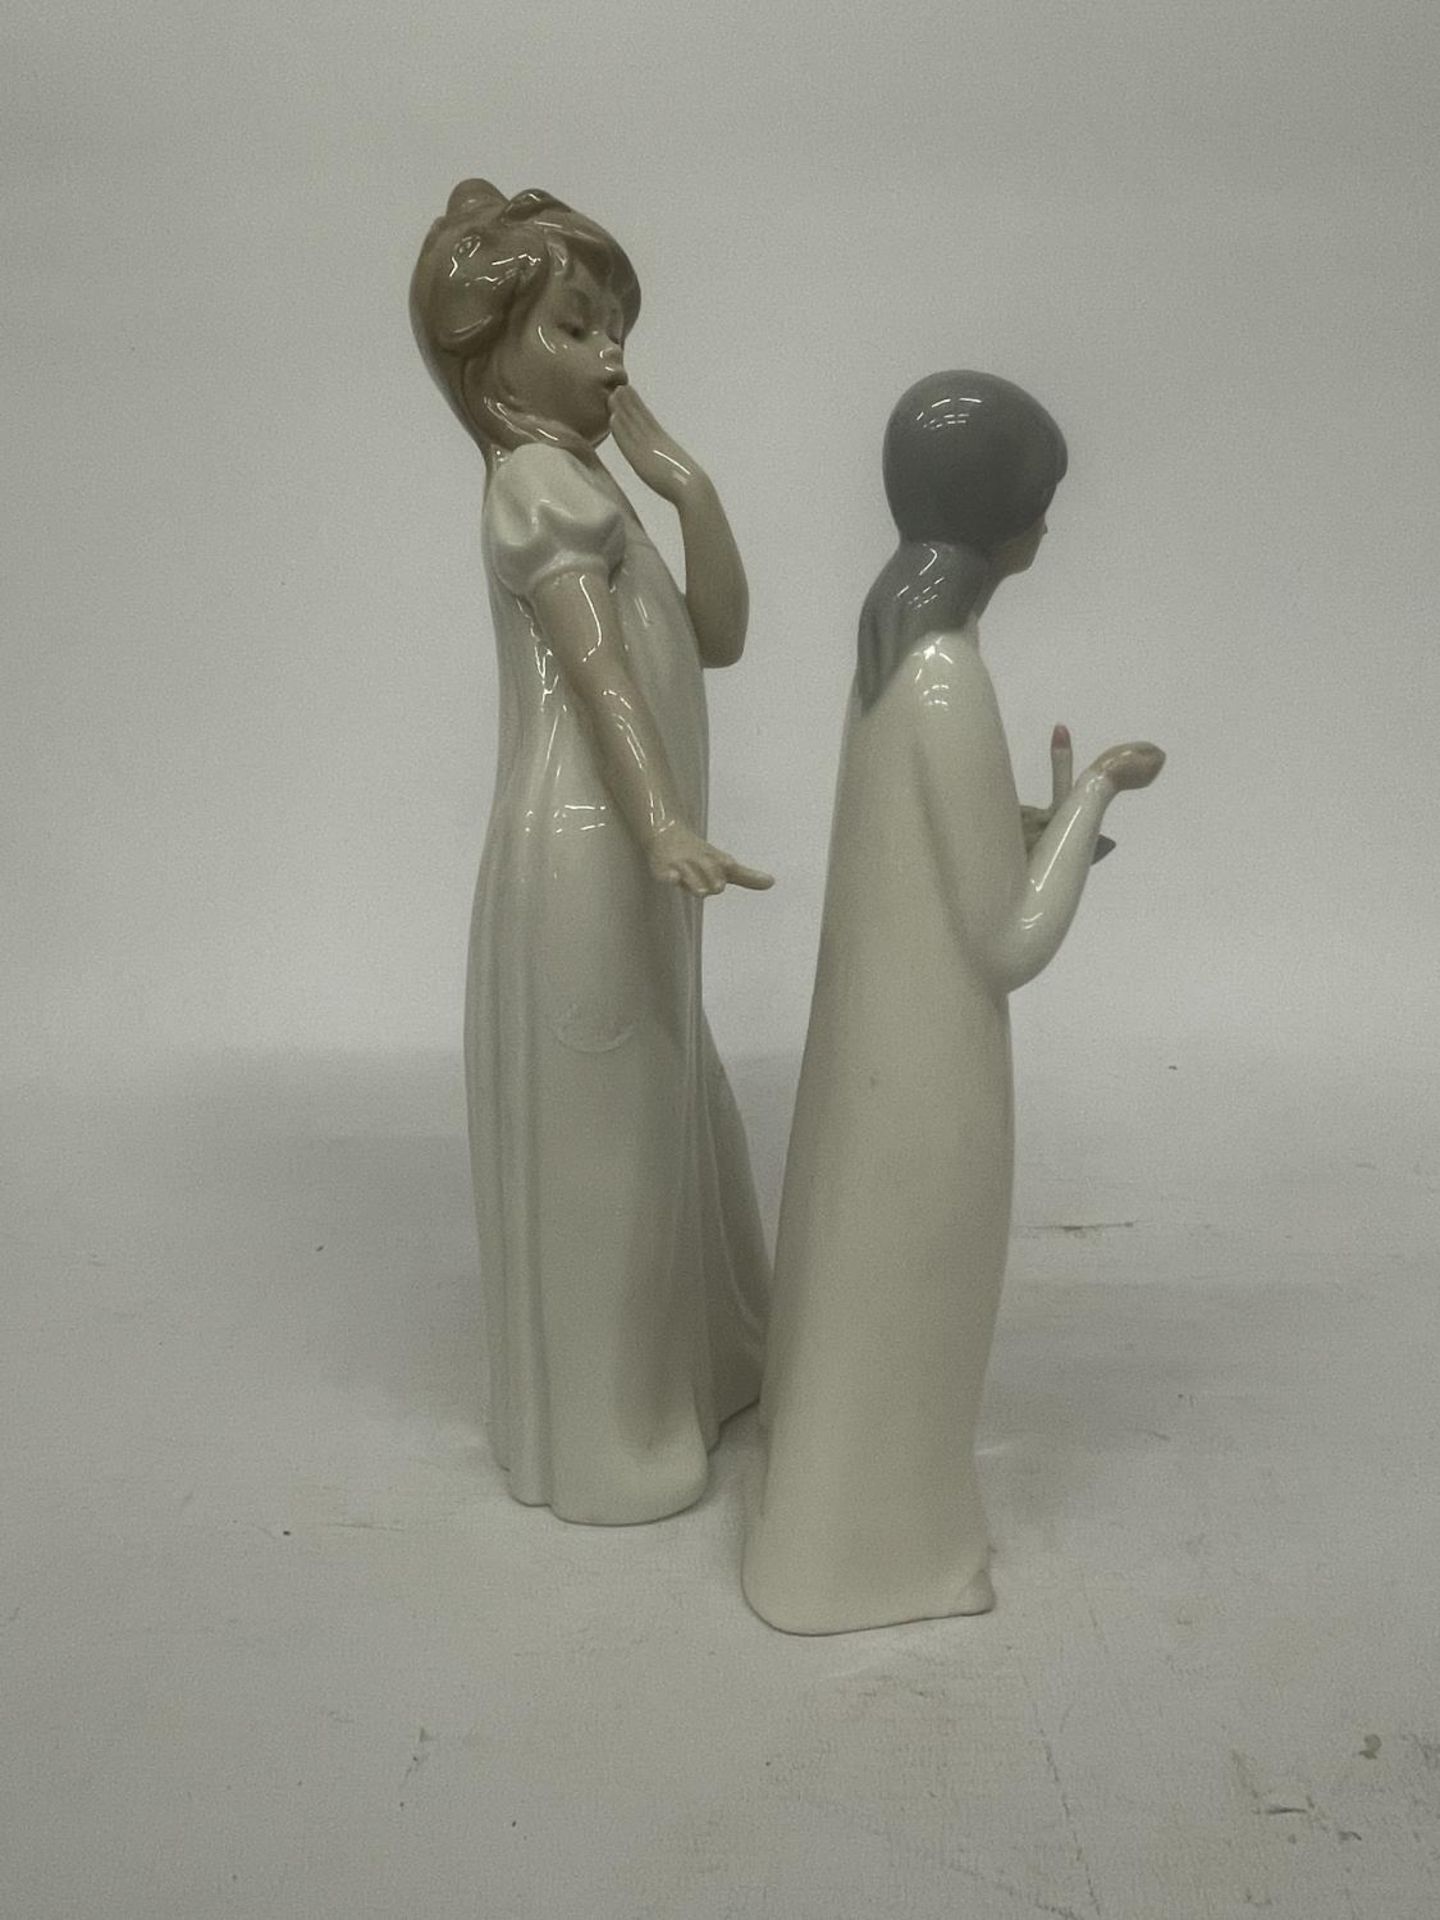 A NAO FIGURE OF A GIRL YAWNING TOGETHER WITH A MIQUEL REQUENA S.A. FIGURE OF A GIRL HOLDING A CANDLE - Image 2 of 4